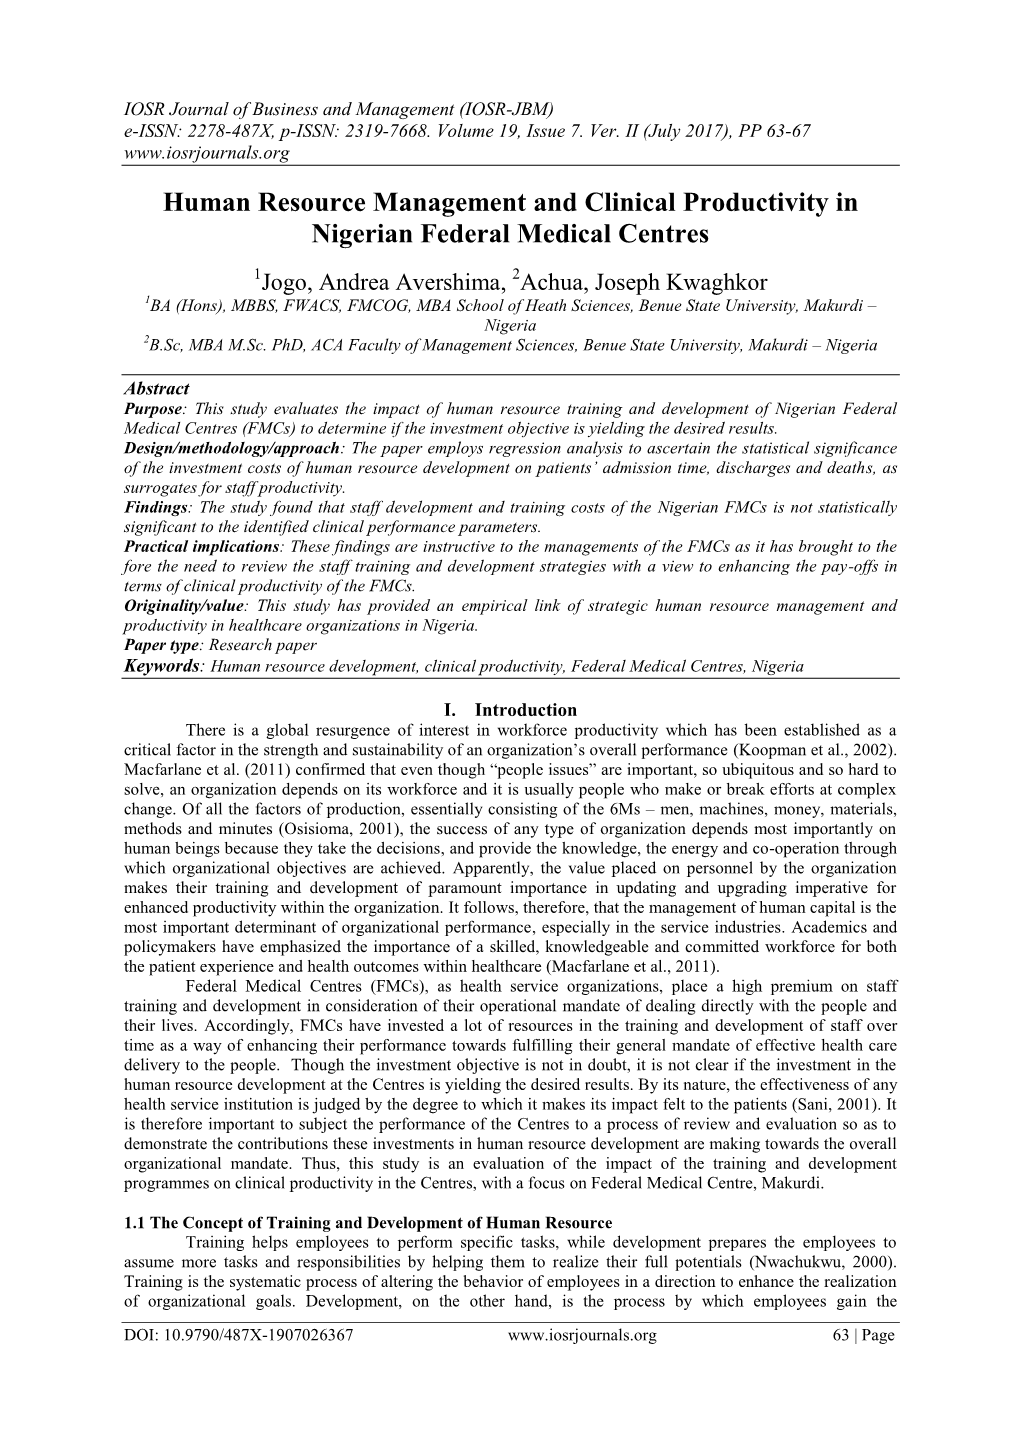 Human Resource Management and Clinical Productivity in Nigerian Federal Medical Centres